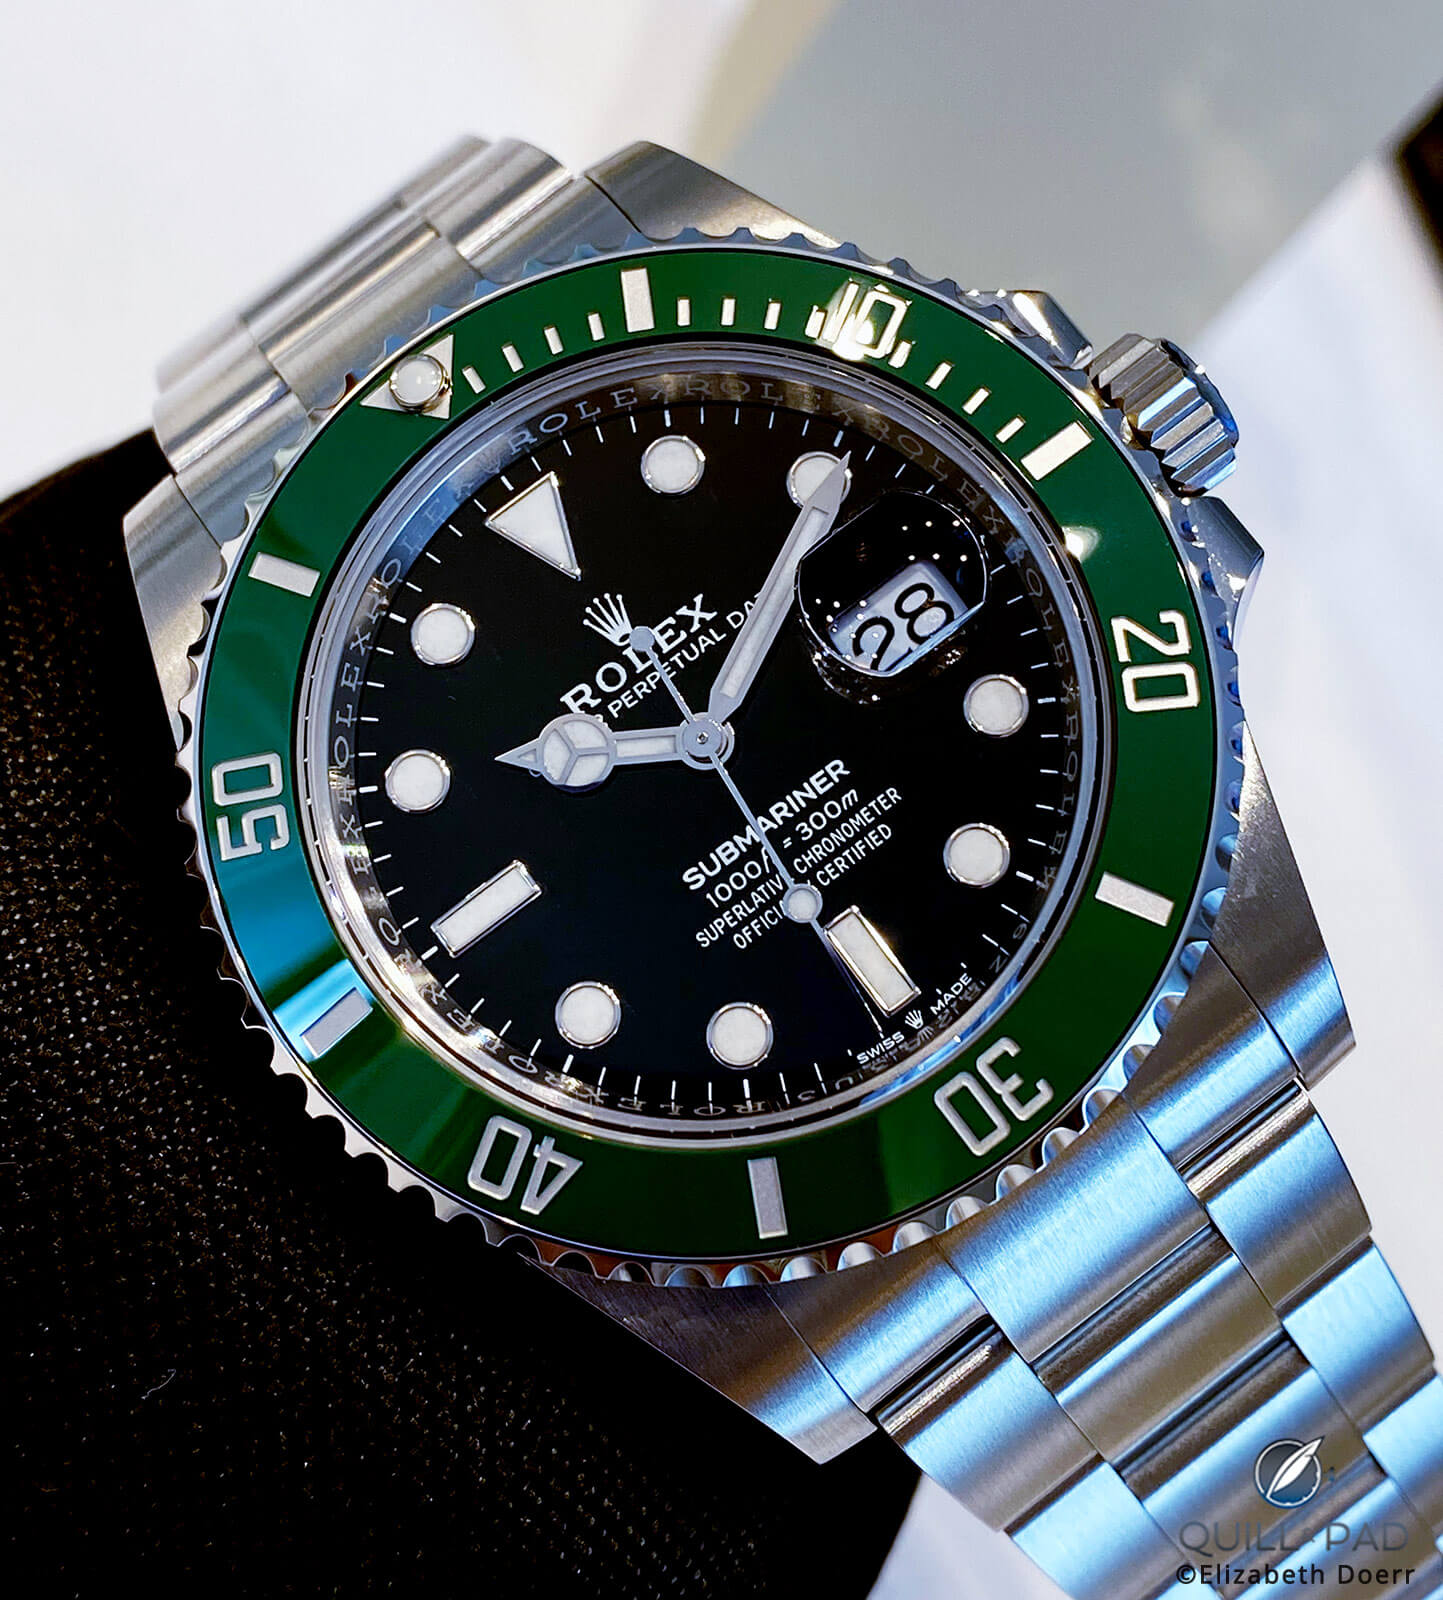 Rouse håndtag Strømcelle All 4 New Rolex 2020 Collection Updates Plus One Watch You Might Have  Missed - Quill & Pad